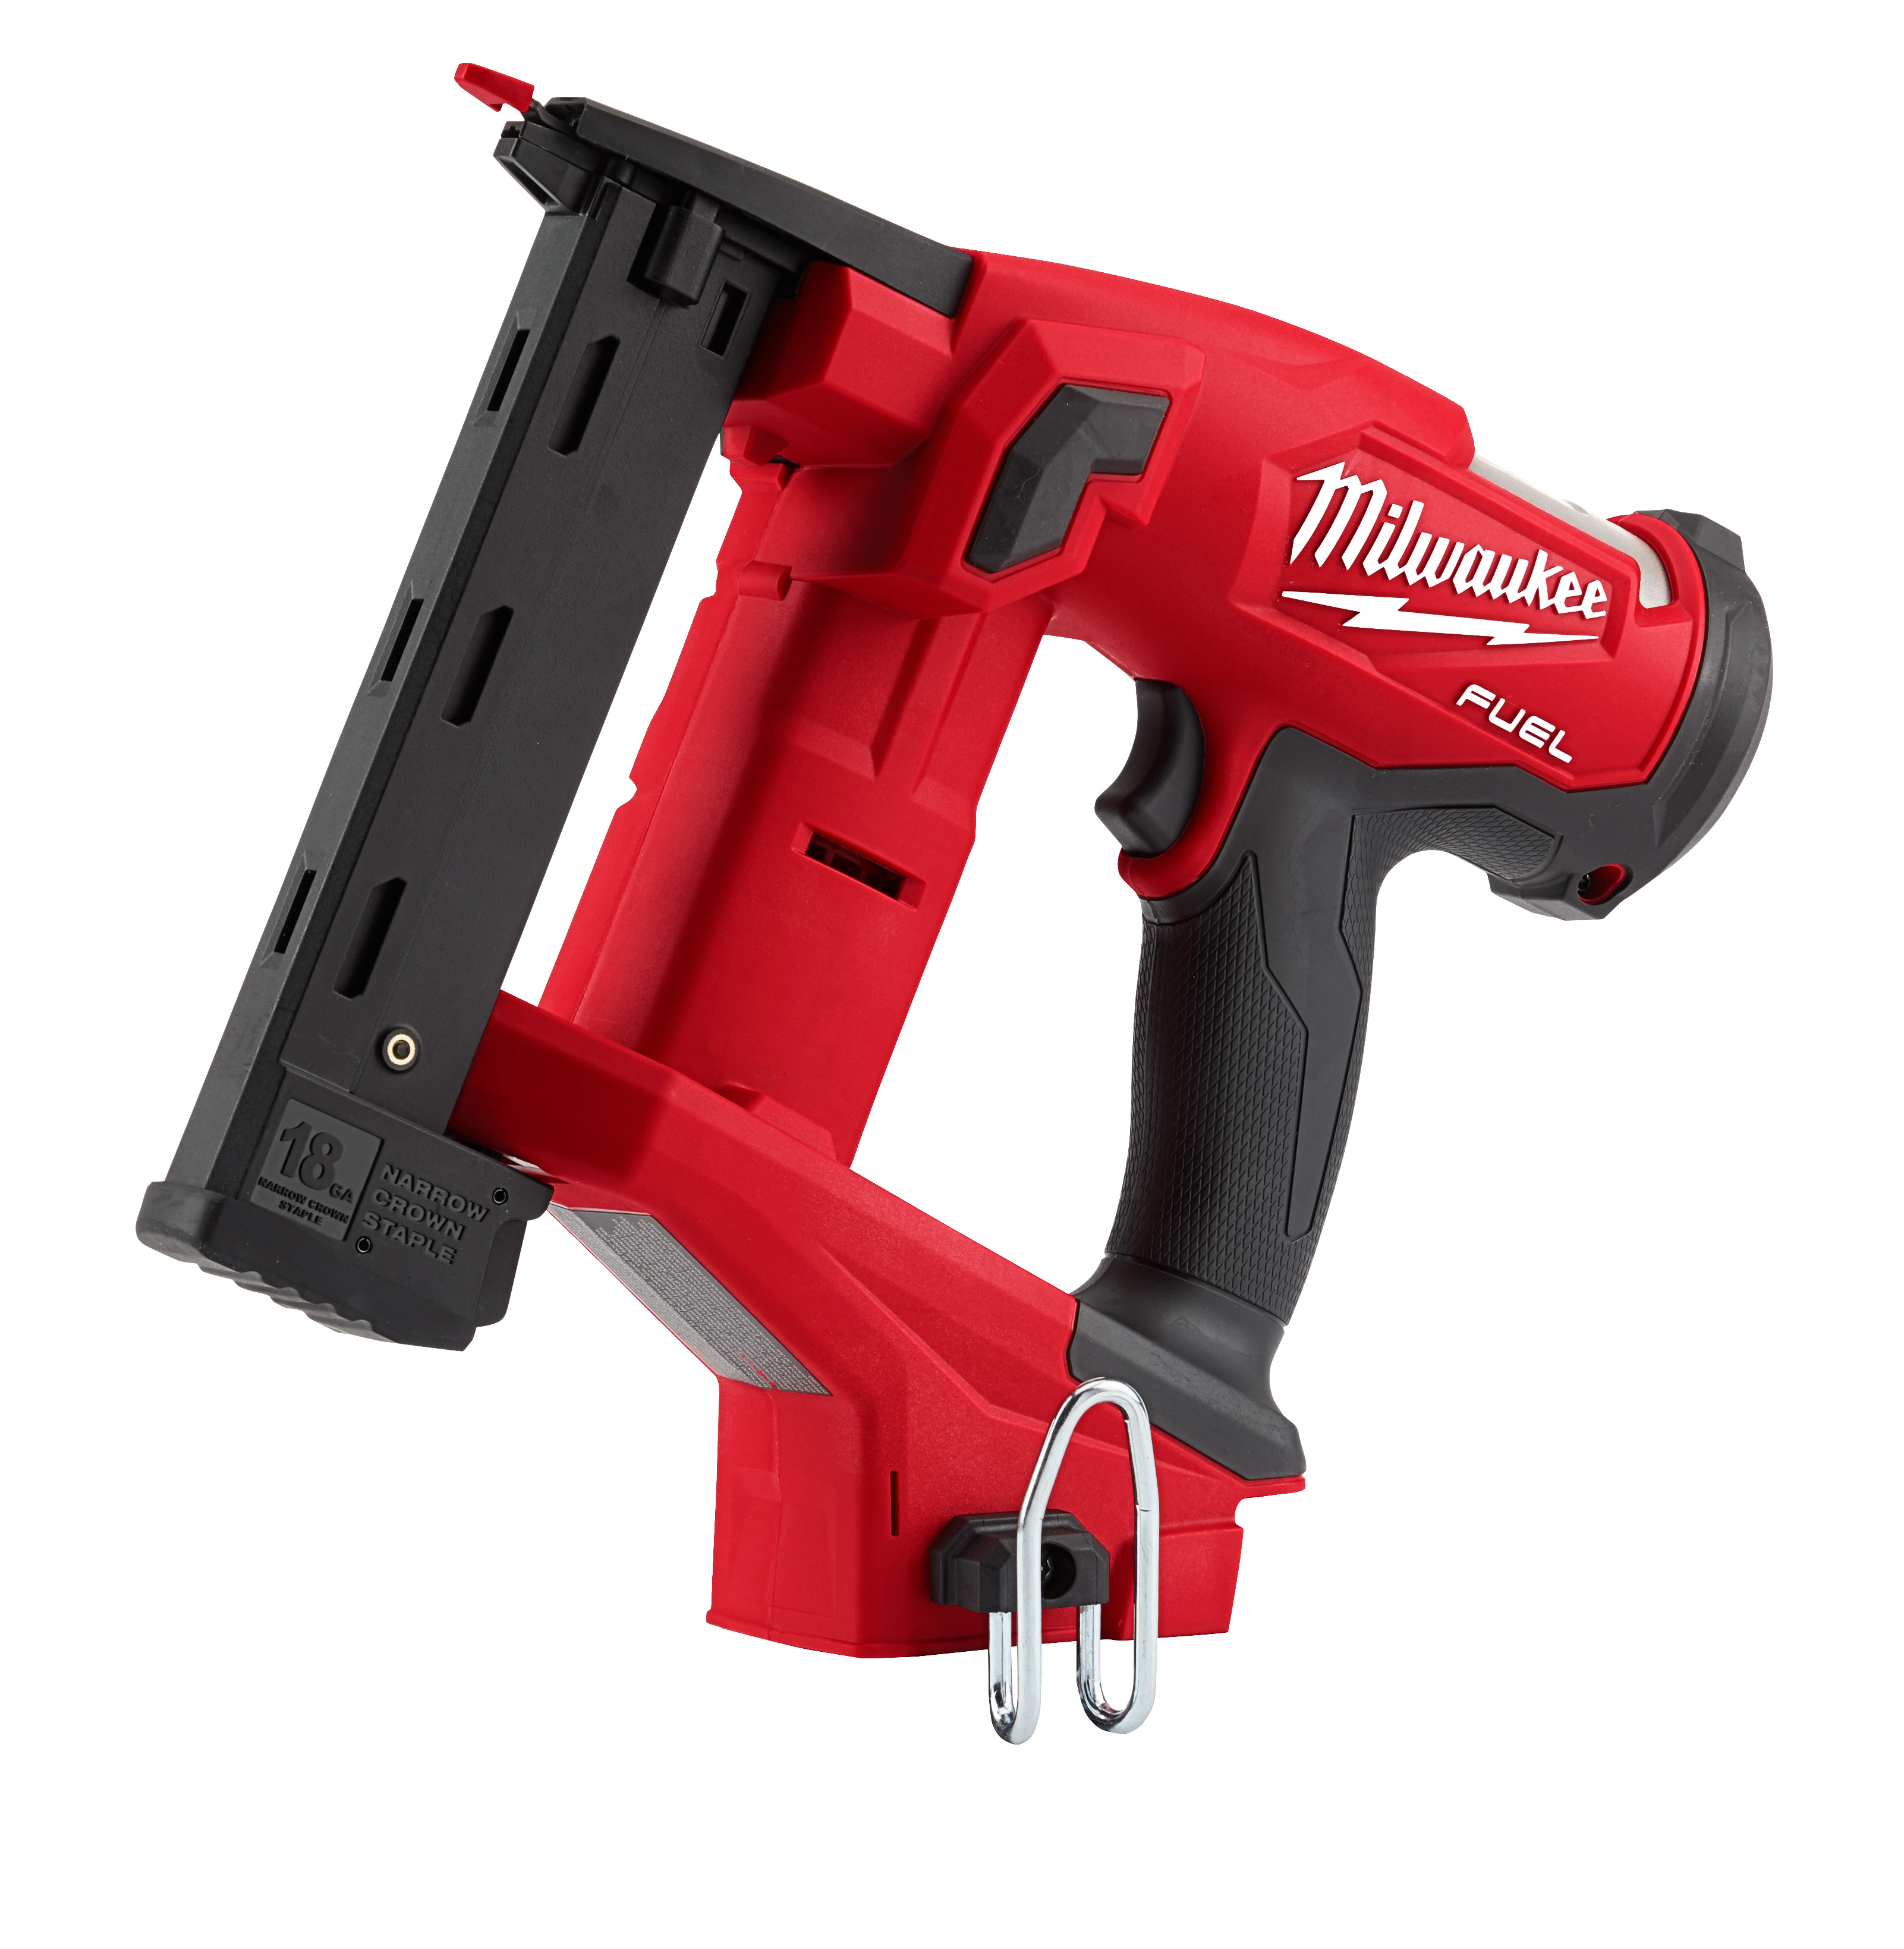 M18 FUEL 18 Volt Lithium-Ion Cordless 18 Gauge 1/4 in. Narrow Crown Stapler - Tool Only